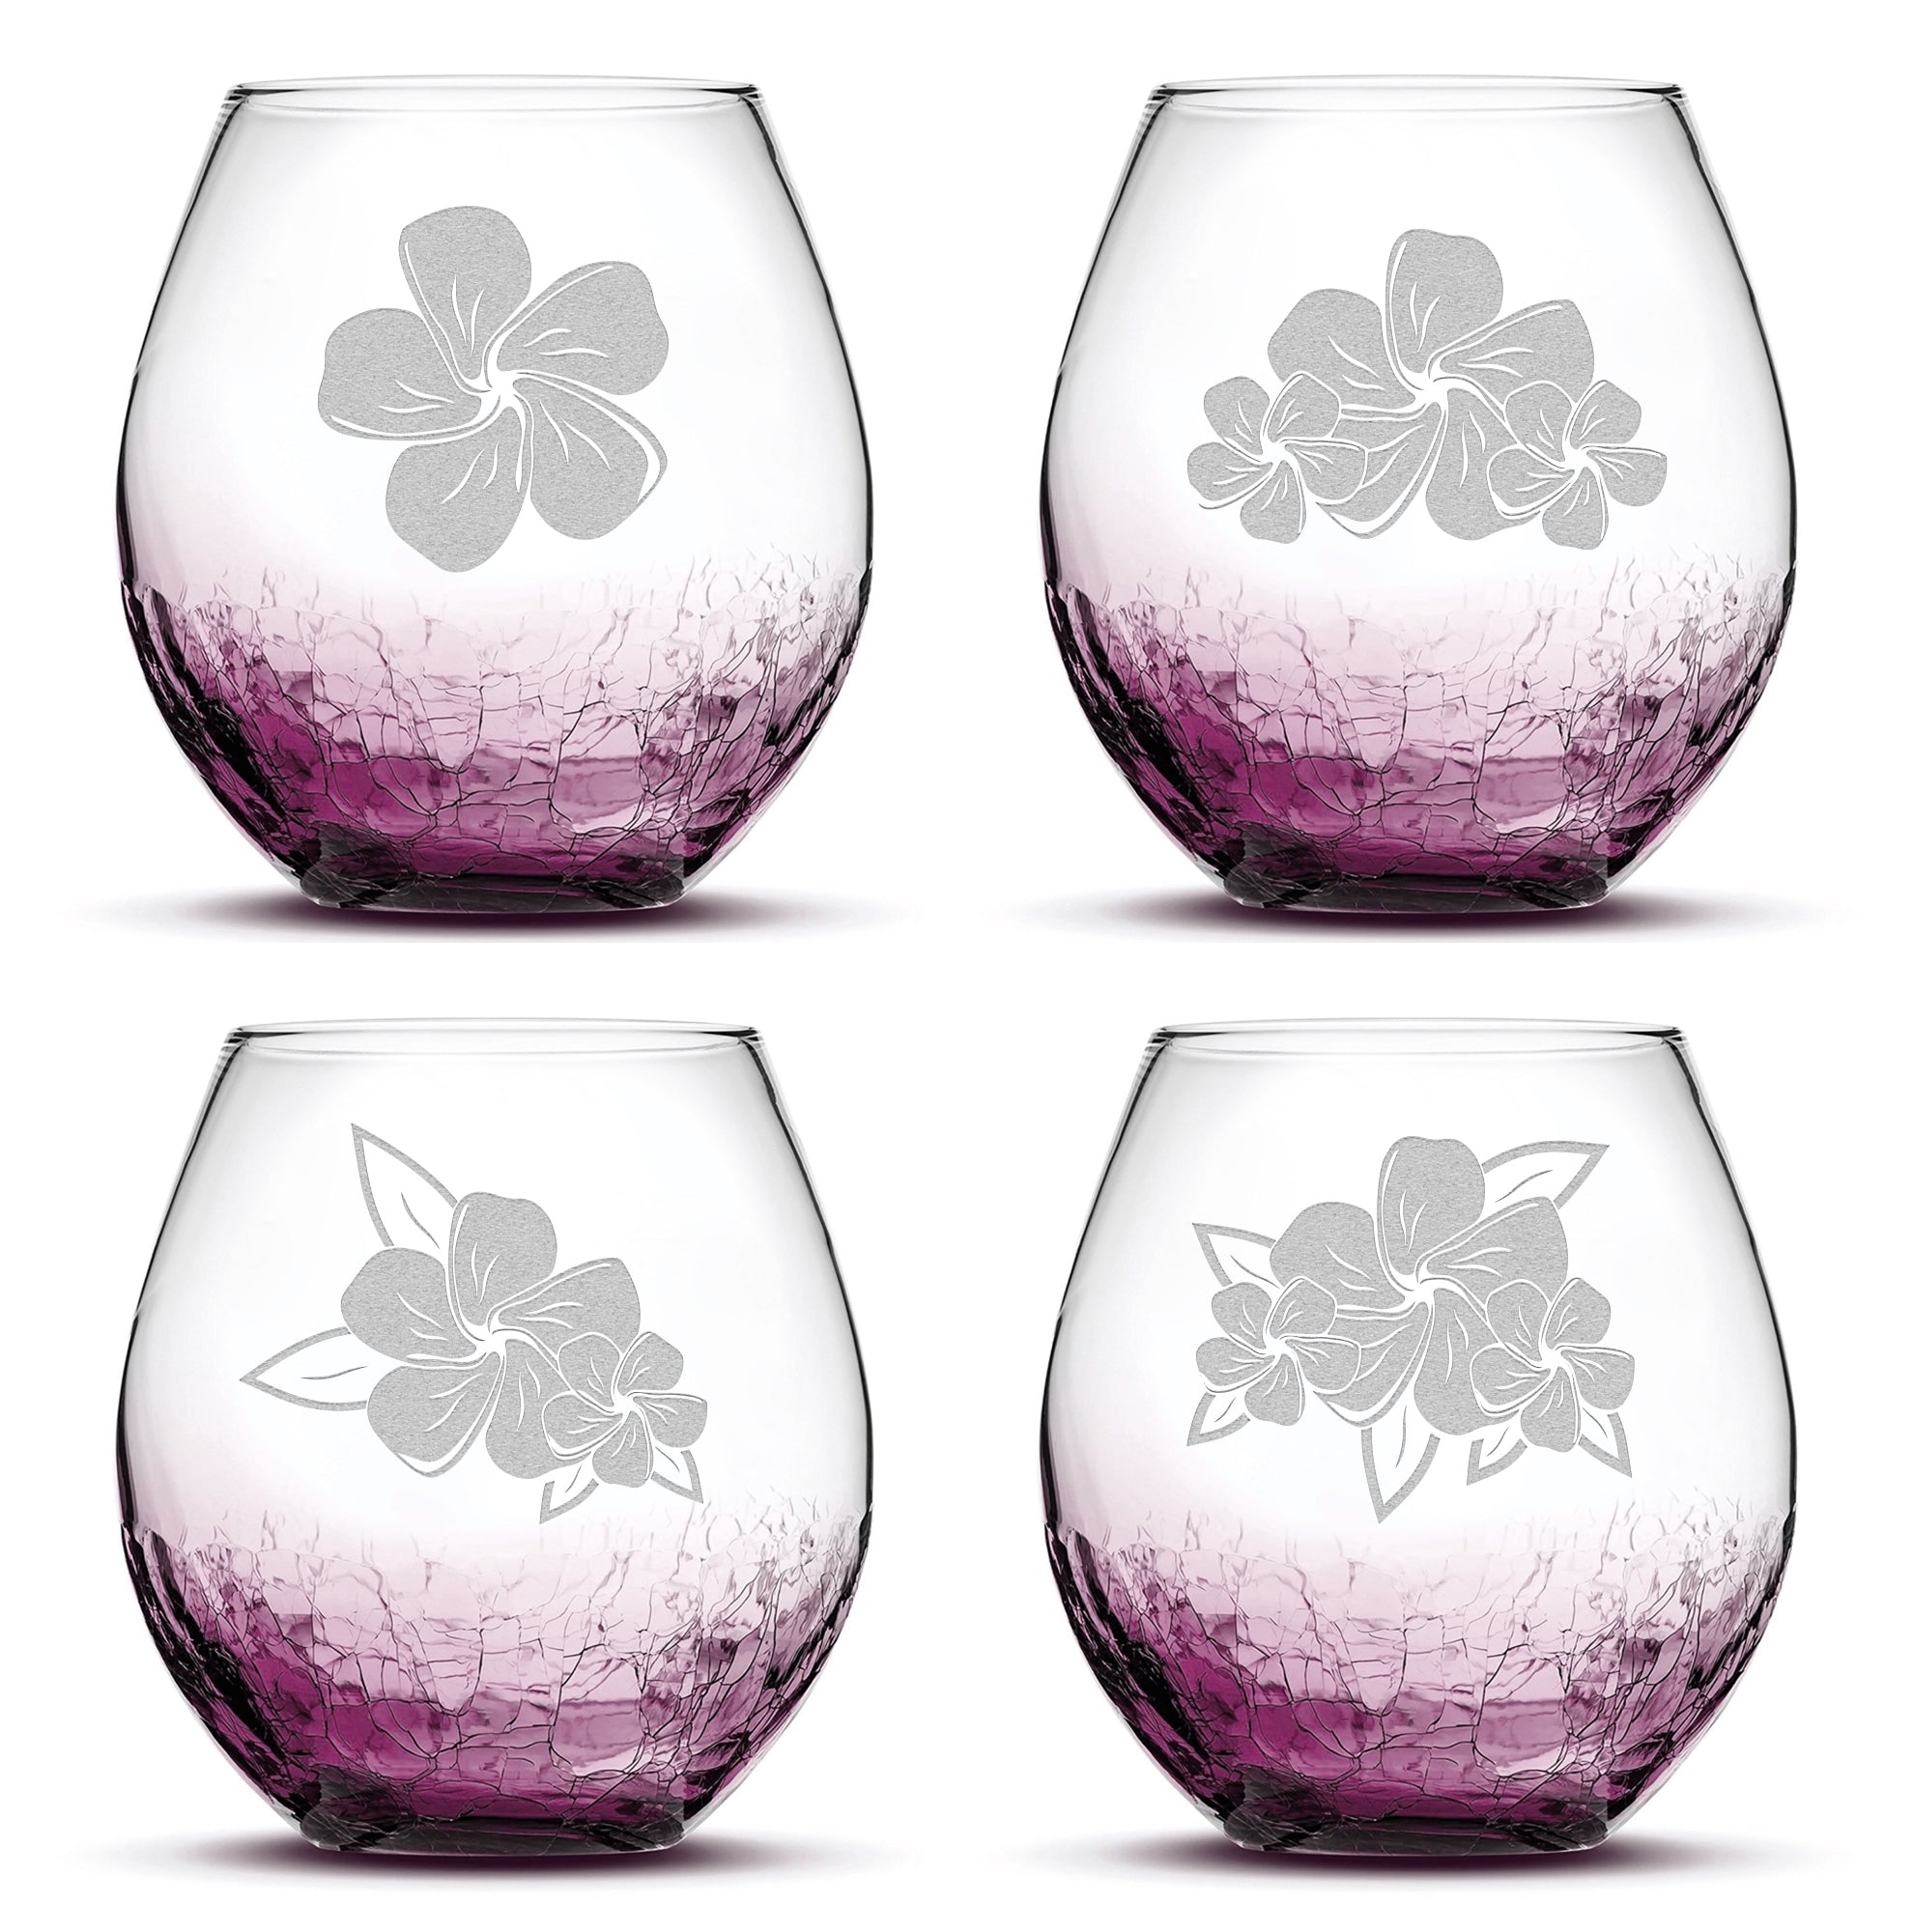 Famous Men of Wine Etched Stemless Glass set of 4 (4 Designs)